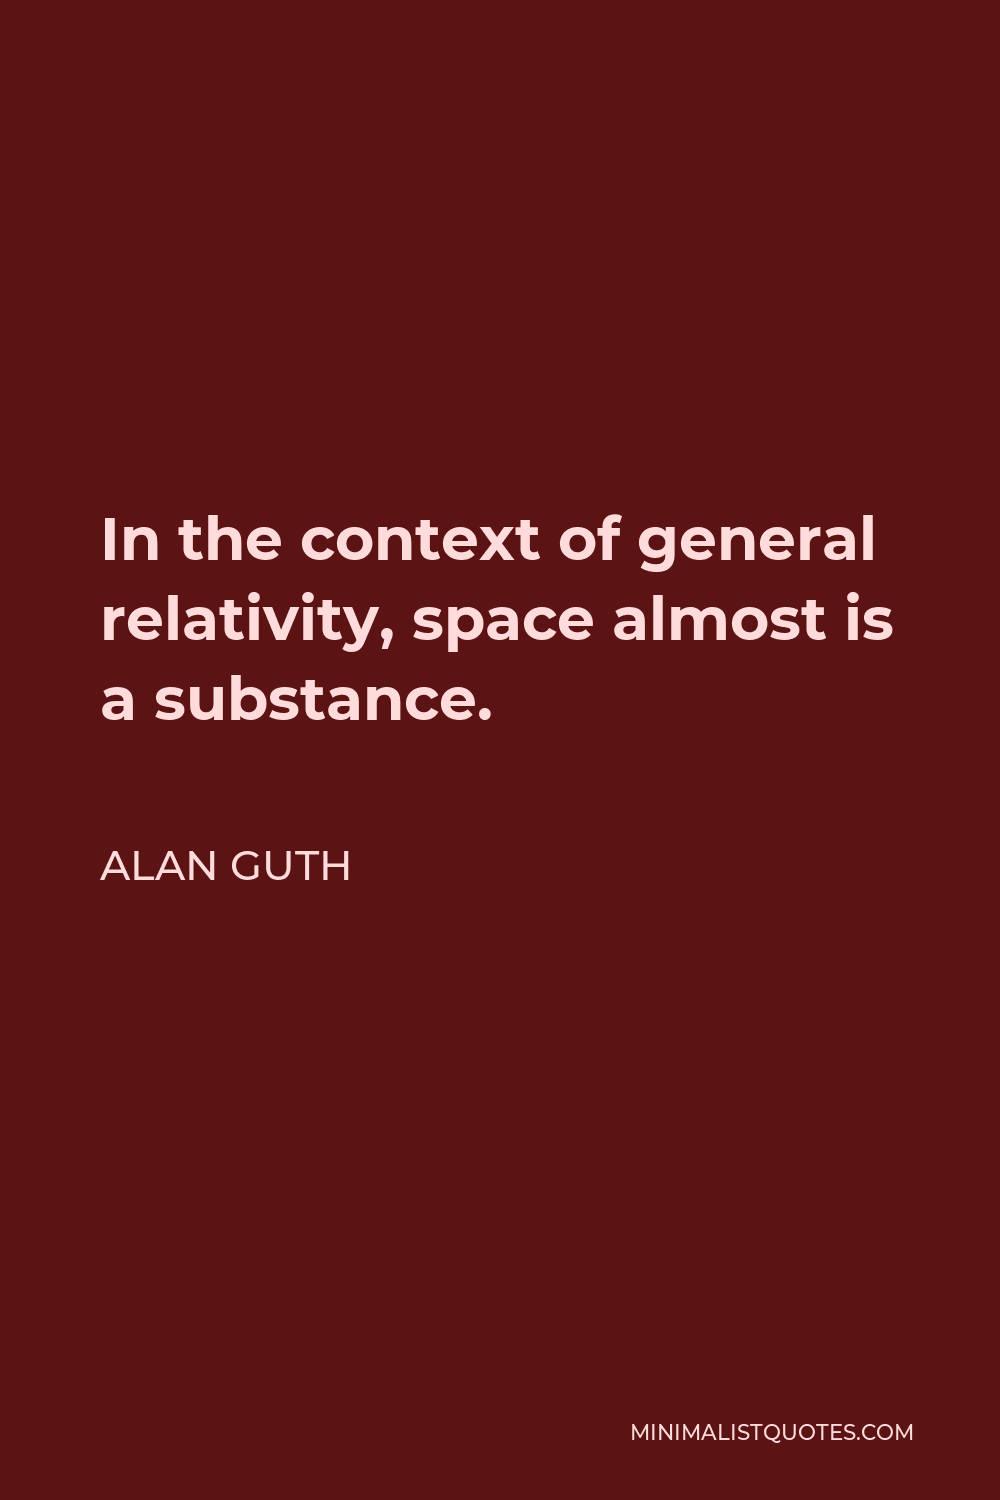 Alan Guth Quote - In the context of general relativity, space almost is a substance.